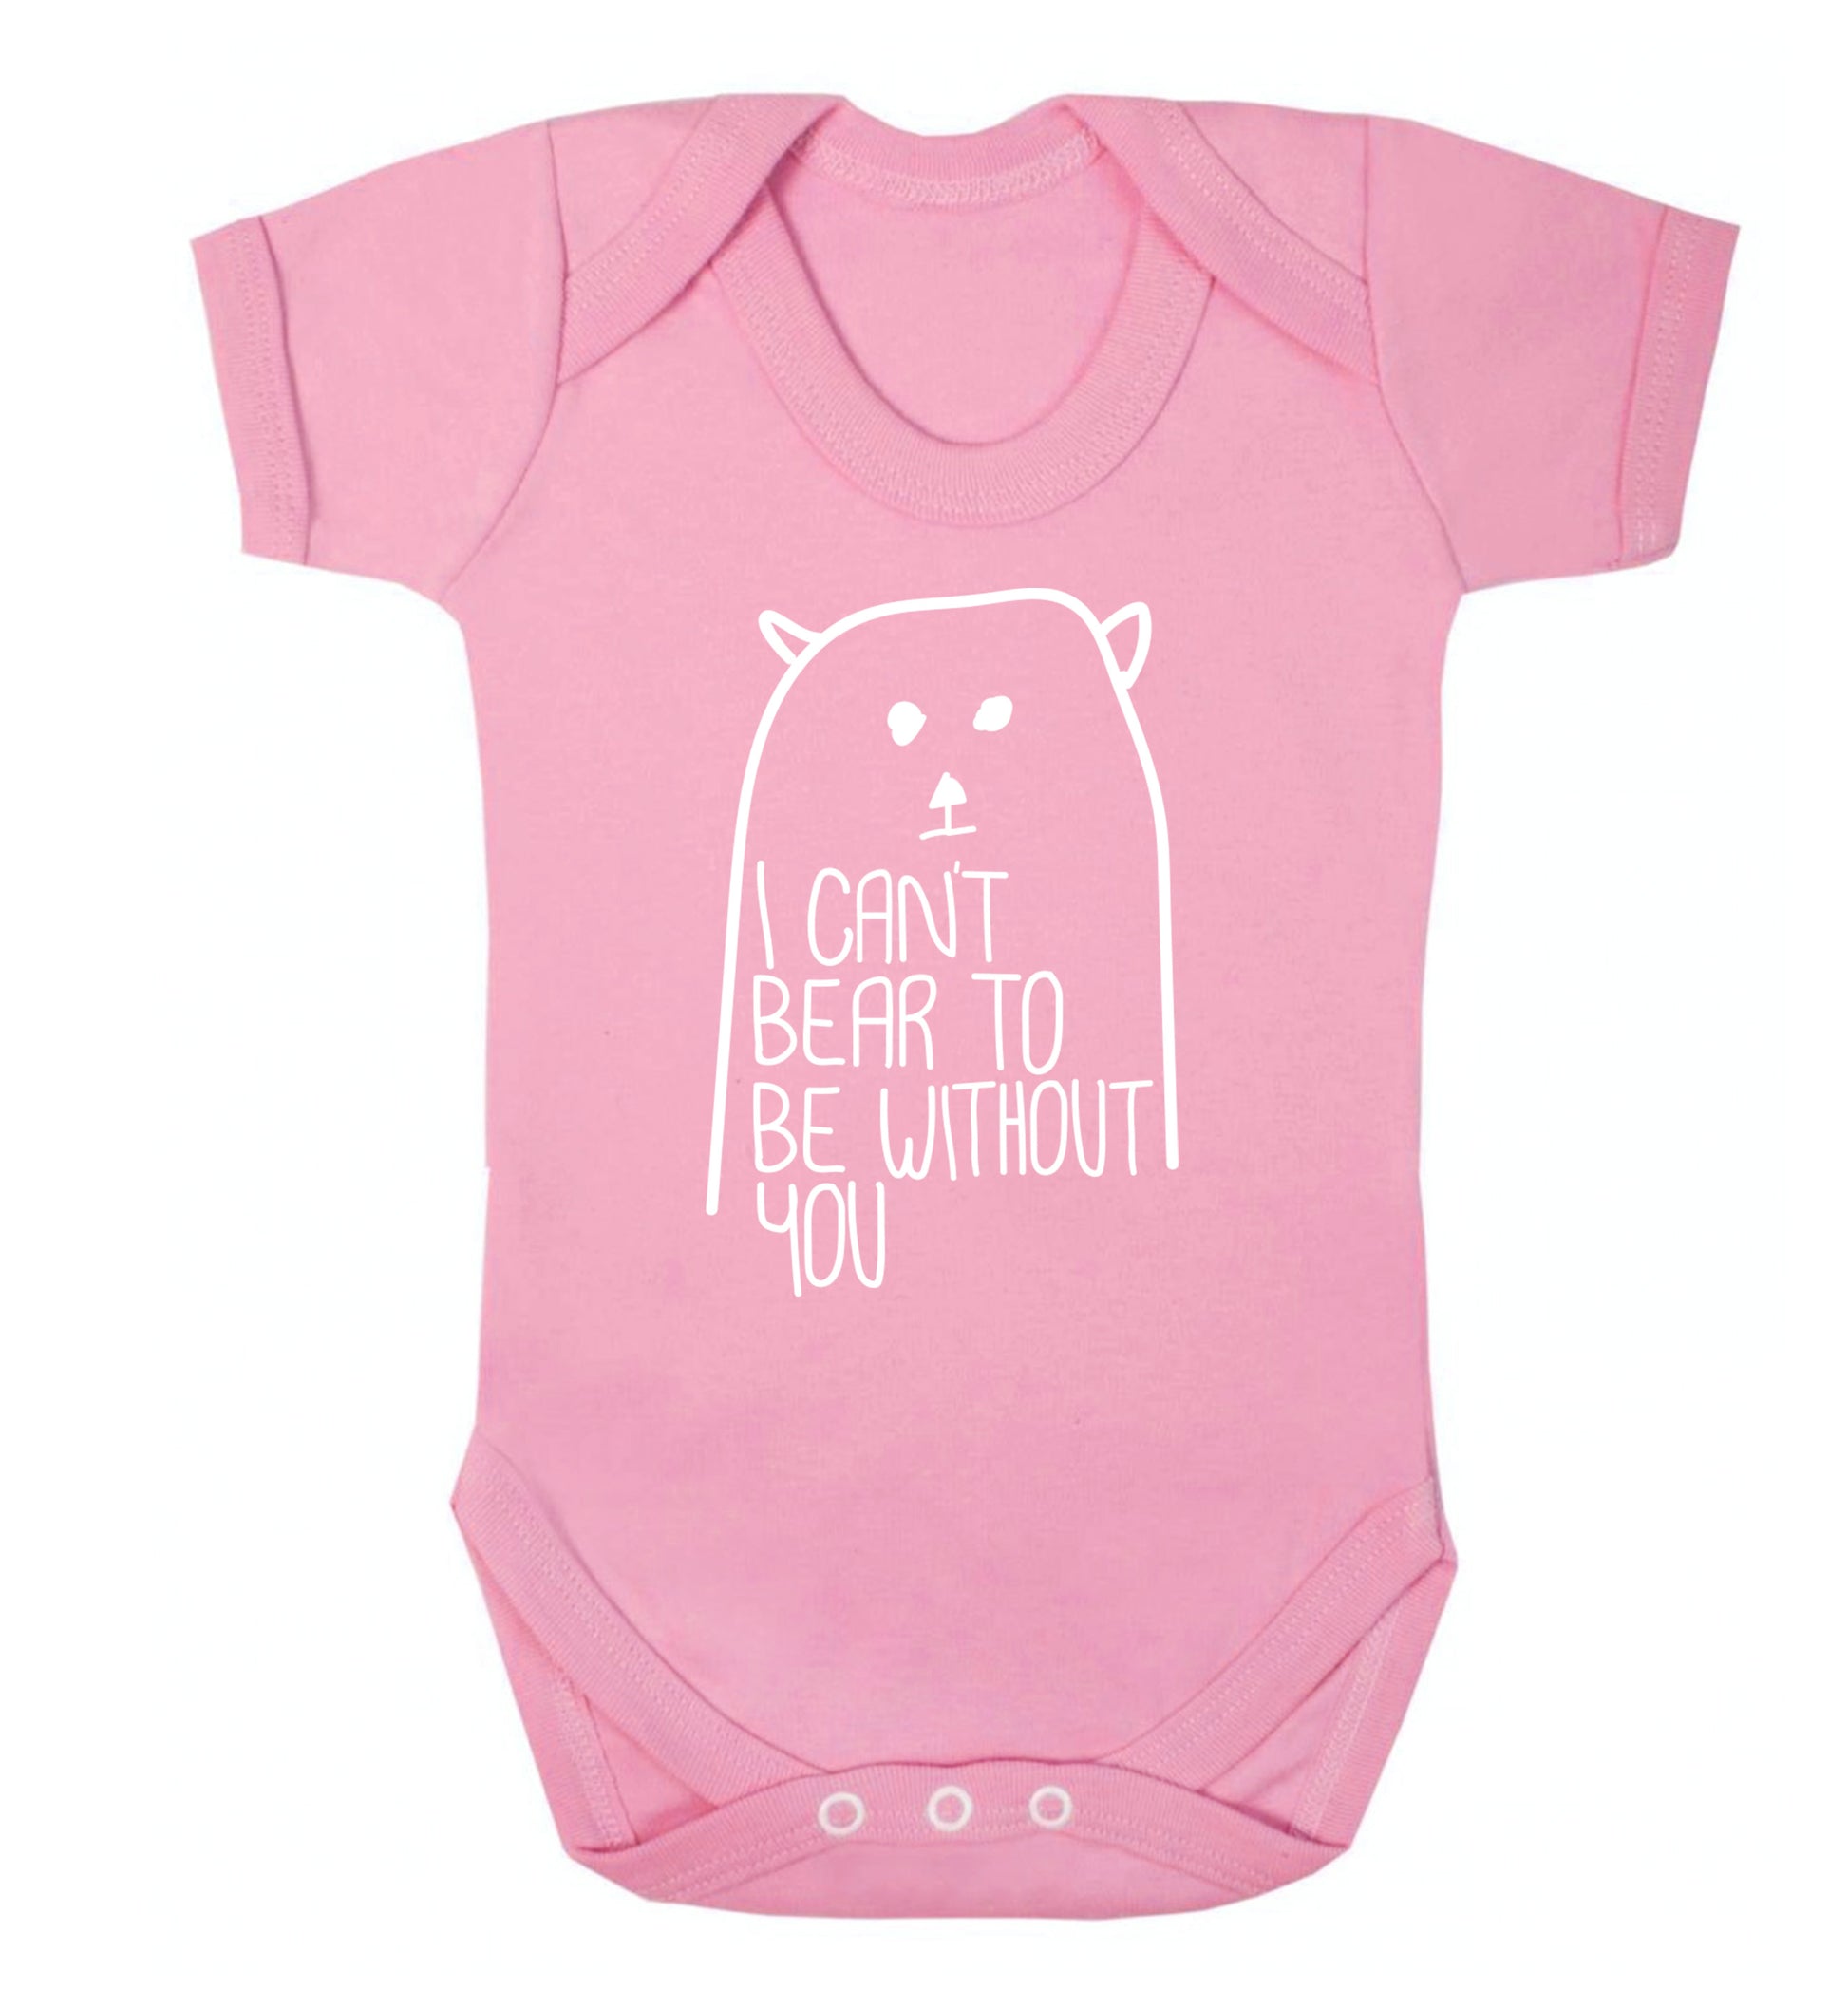 I can't bear to be without you Baby Vest pale pink 18-24 months